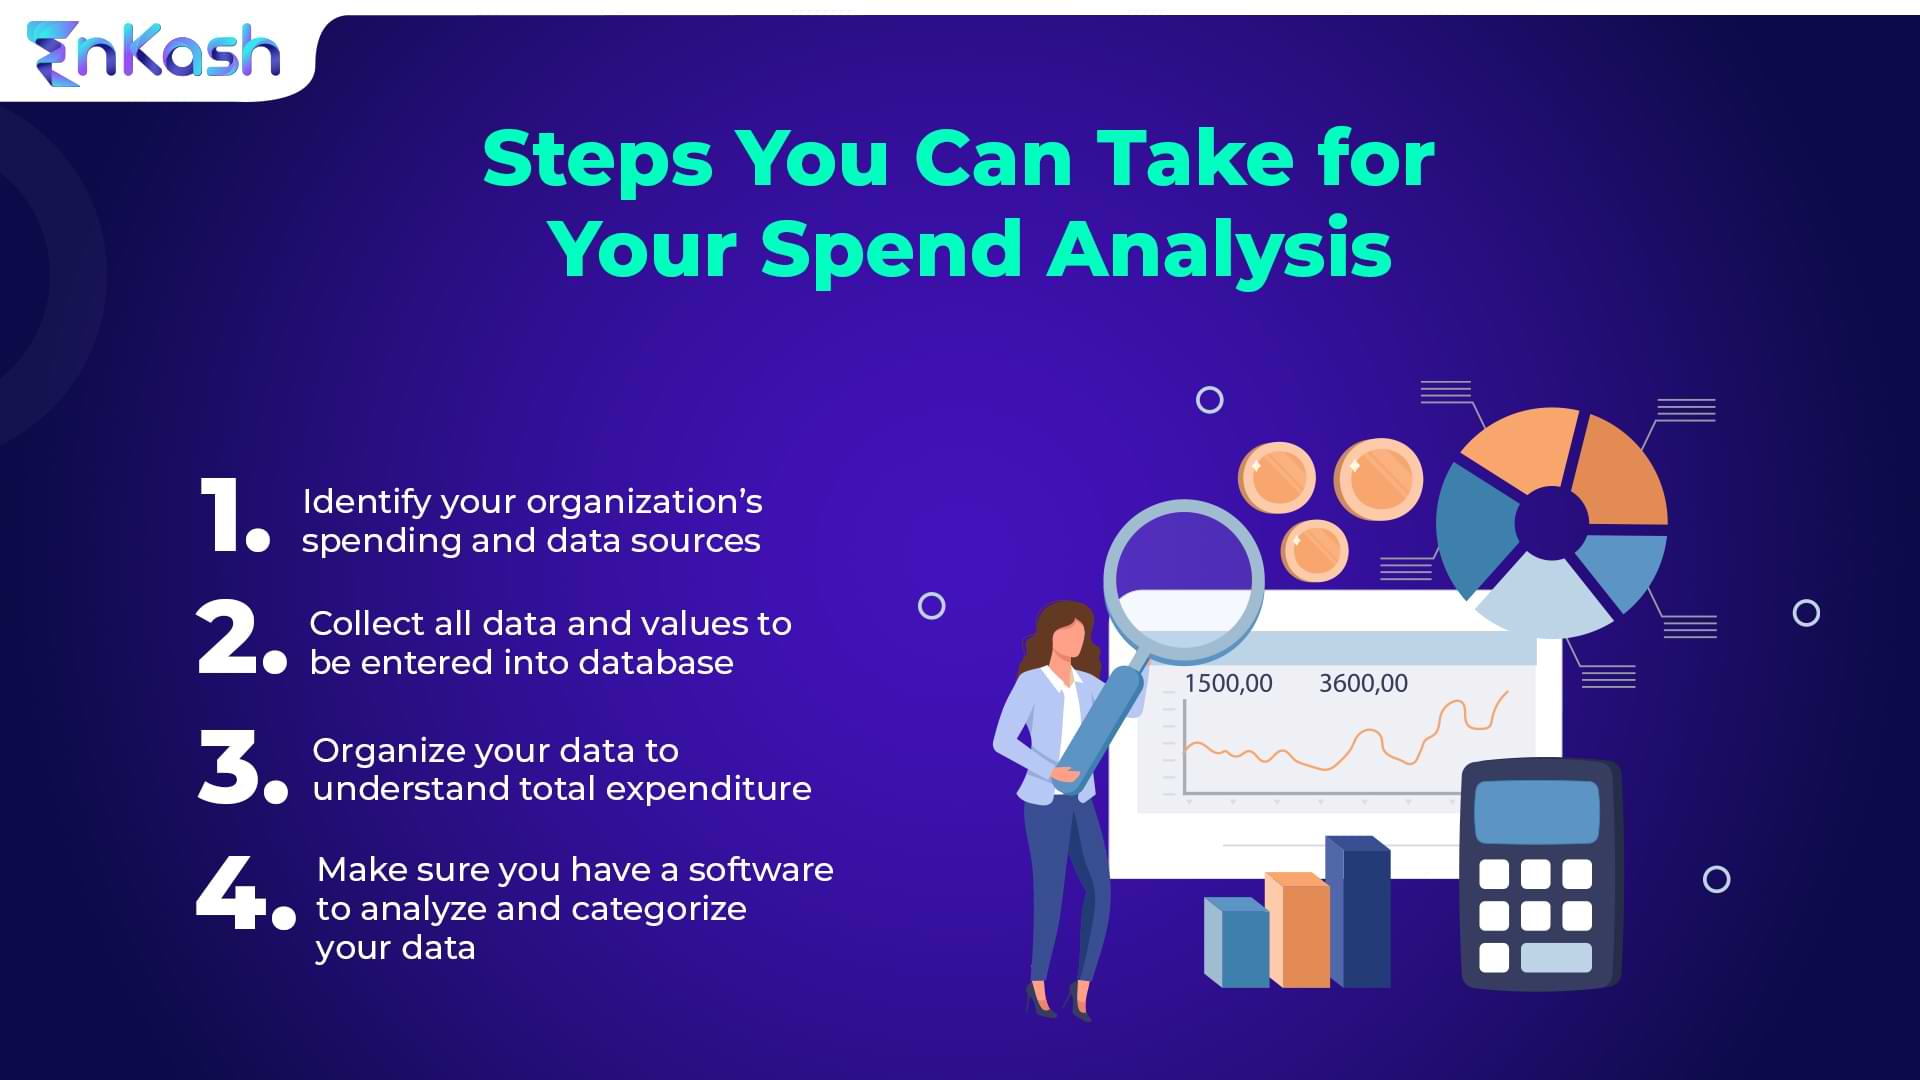 Steps you can take for your spend analysis